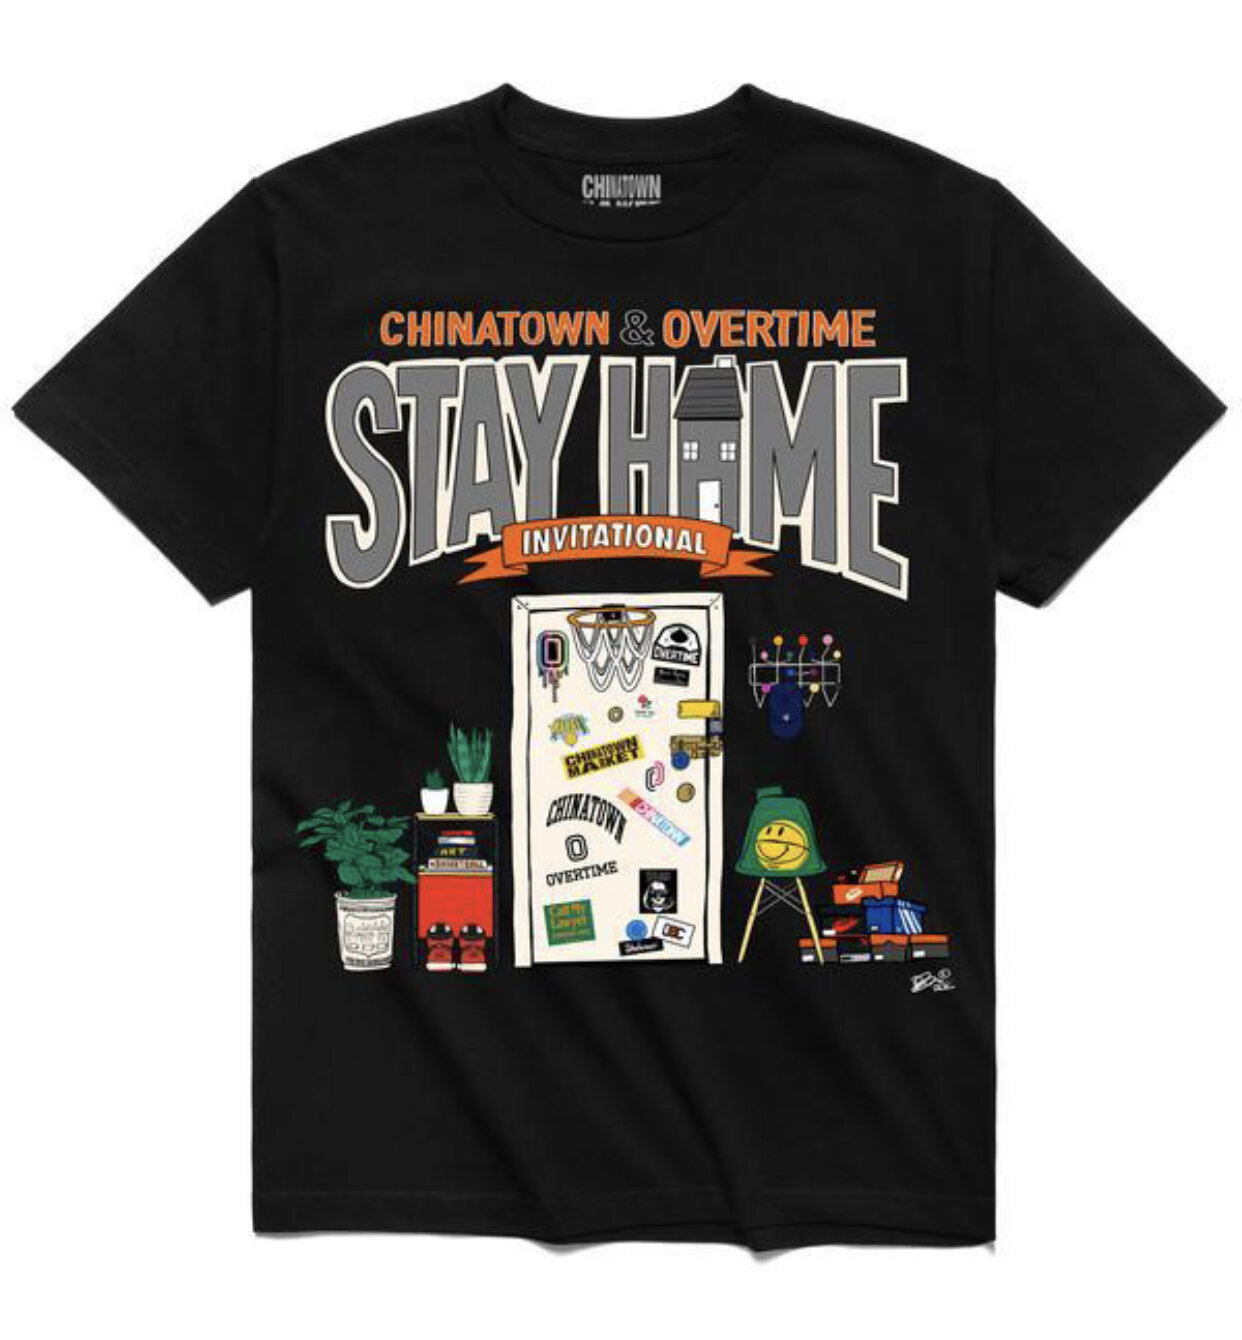 Stay Home Invitational T-Shirt by Dustin O. Canalin For Chinatown Market &amp; Overtime